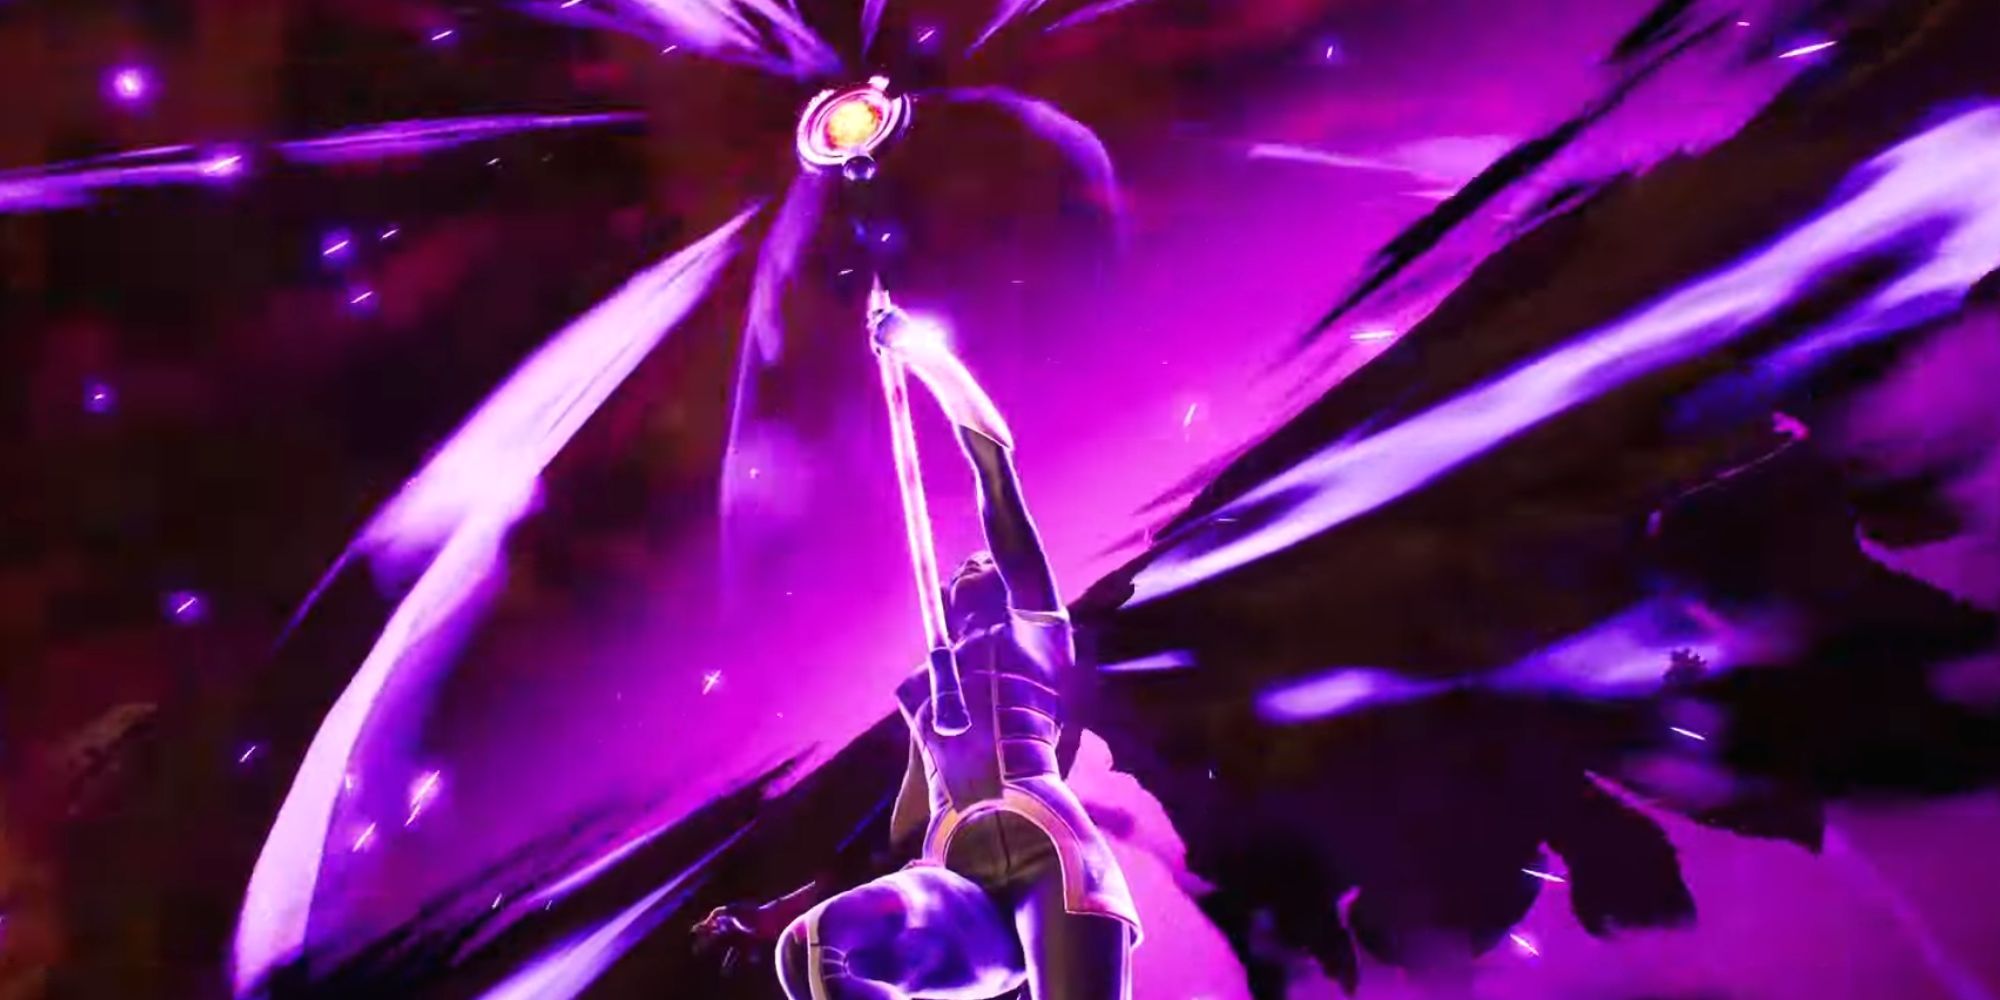 Nico Minoru using her "Crack The Sky" ability. Nico is holding her staff towards the sky with purple energised wings behind her.